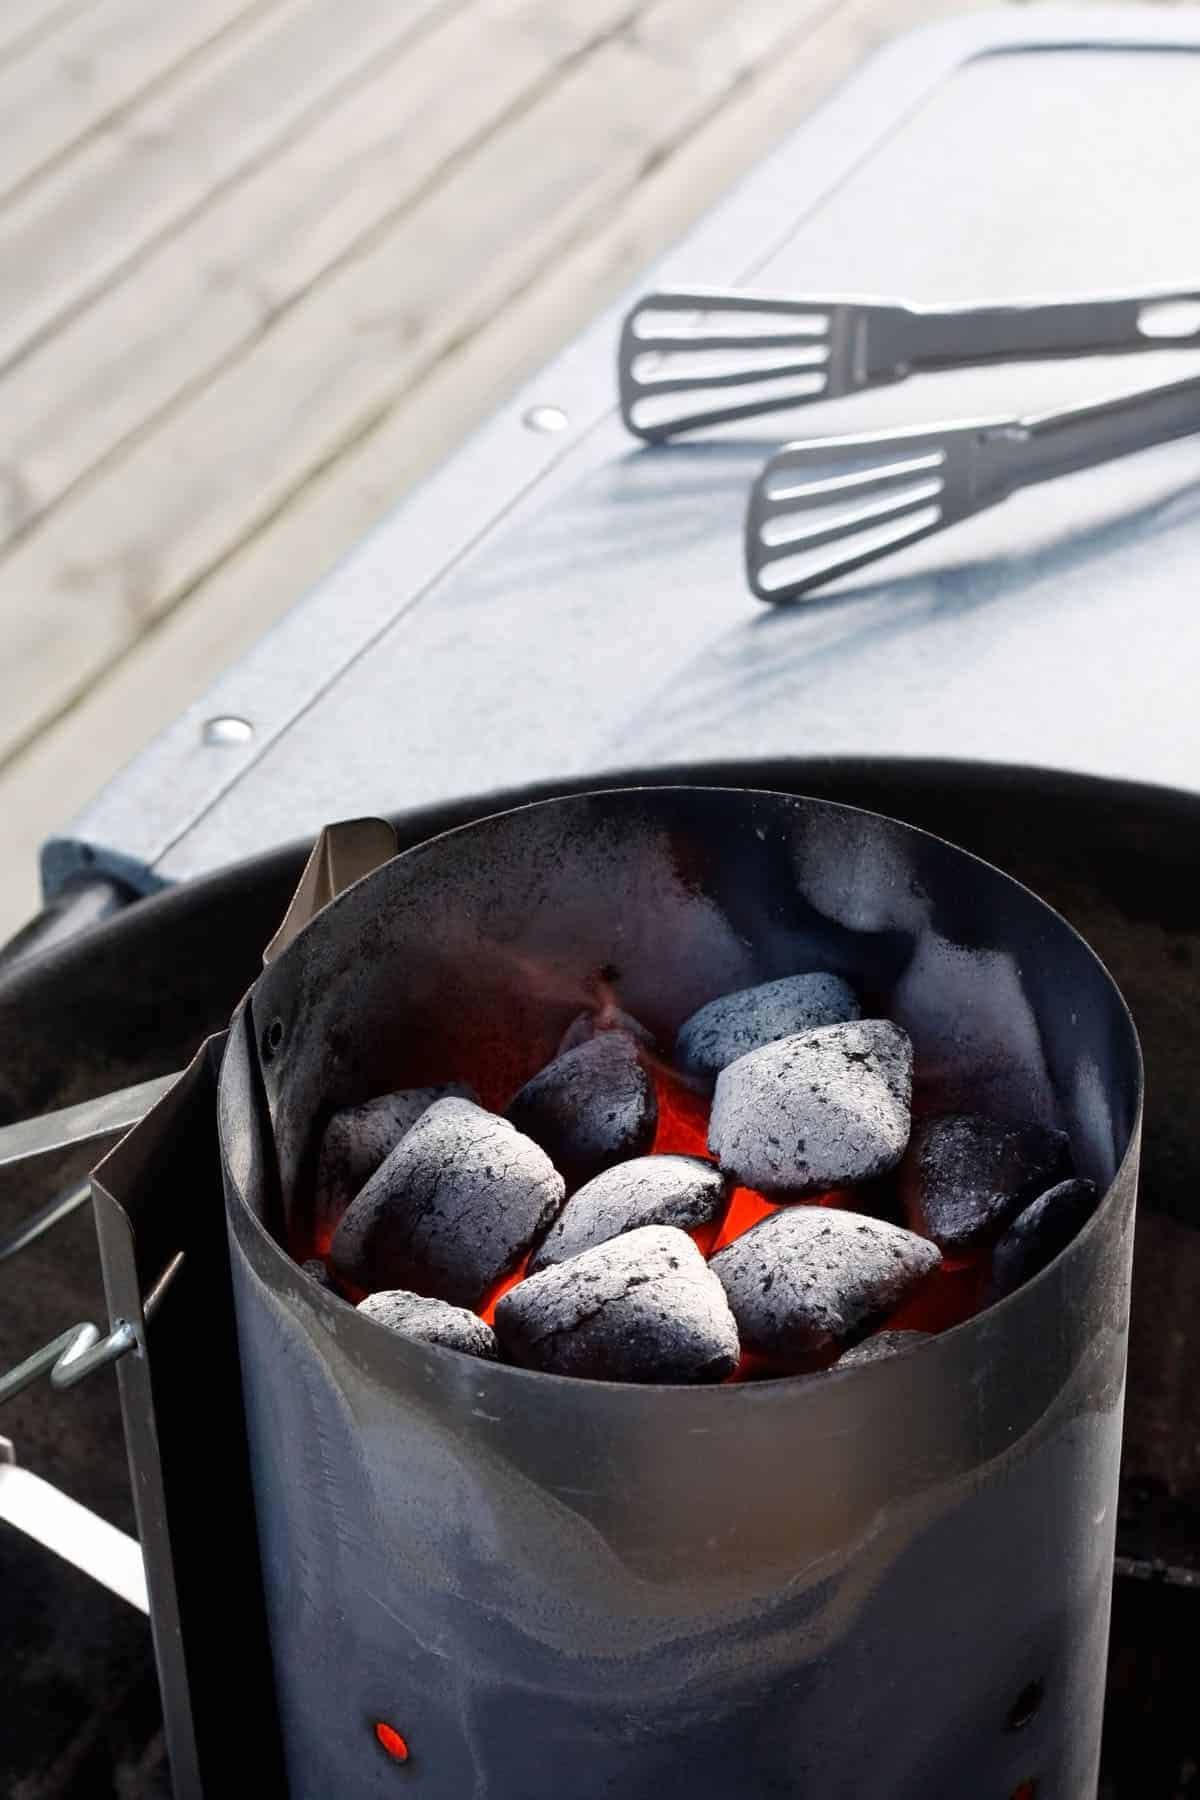 How To Start A Charcoal Grill Without Lighter Fluid (5 ...